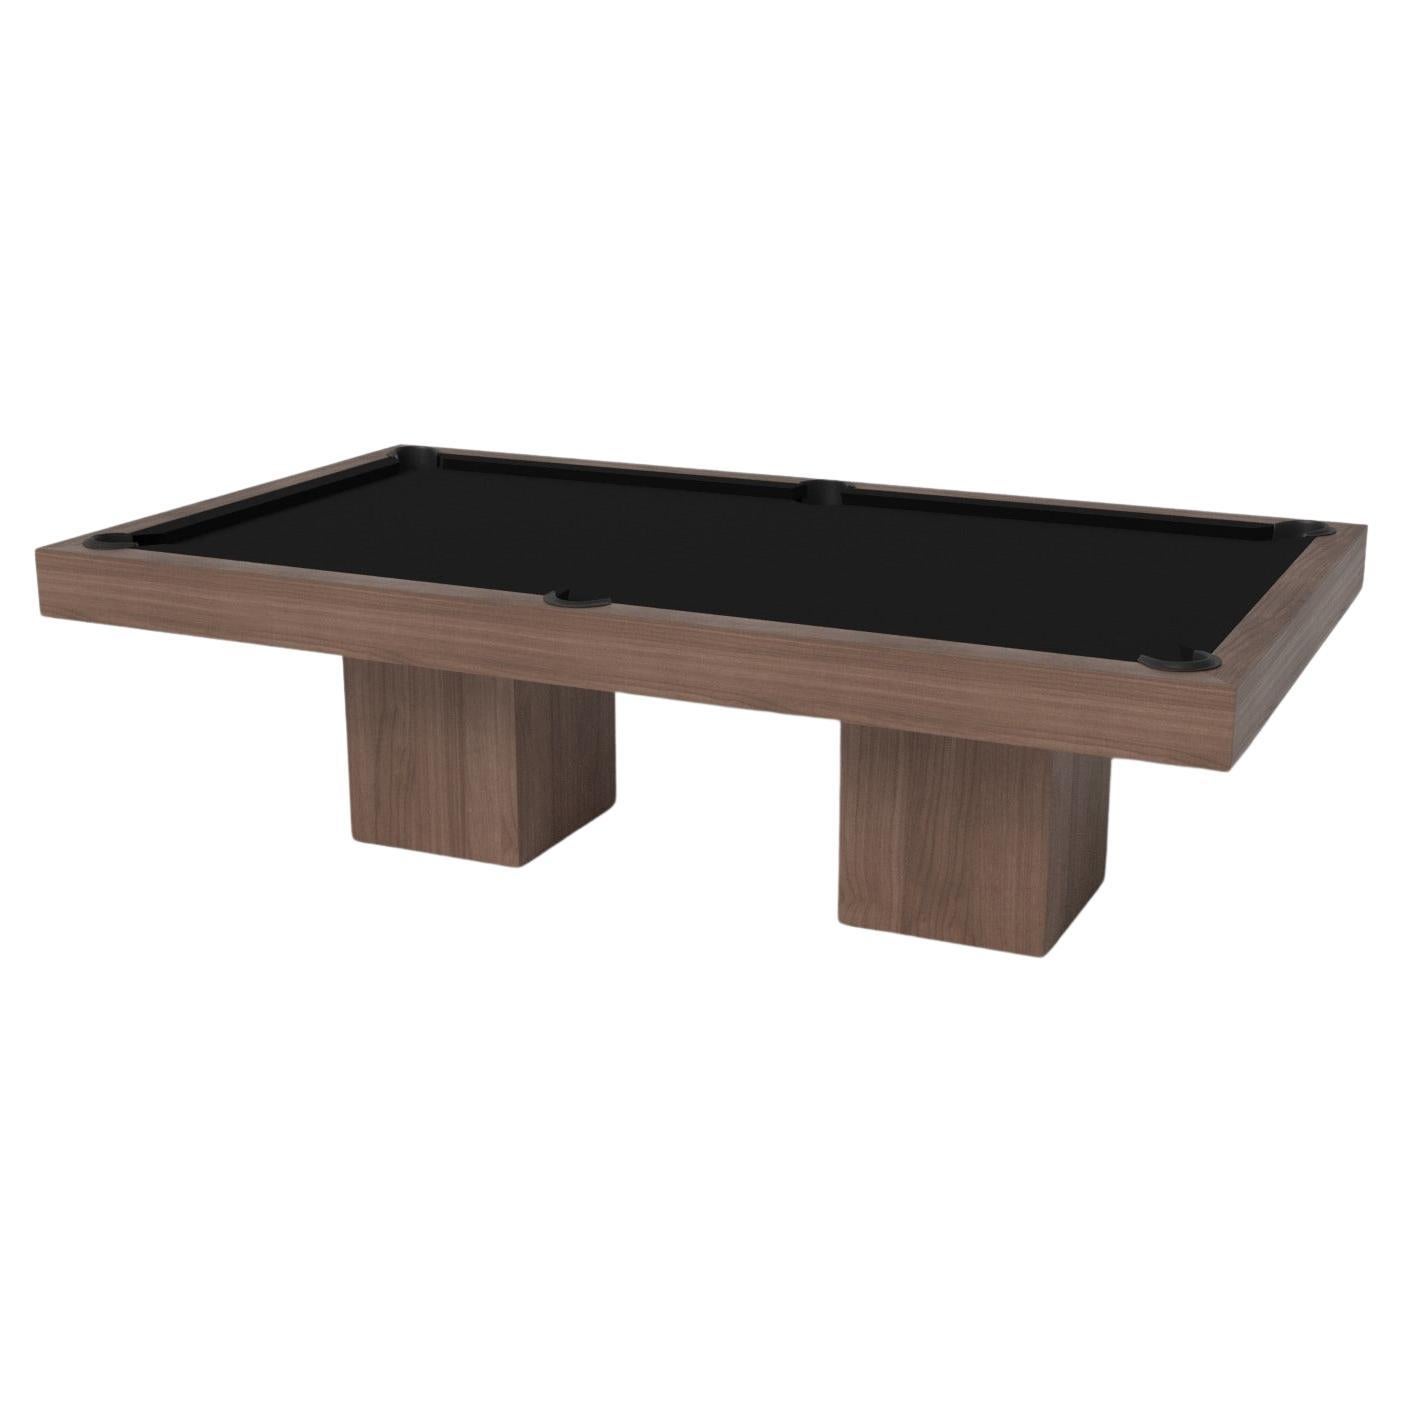 Elevate Customs Trestle Pool Table / Solid Walnut Wood in 9' - Made in USA